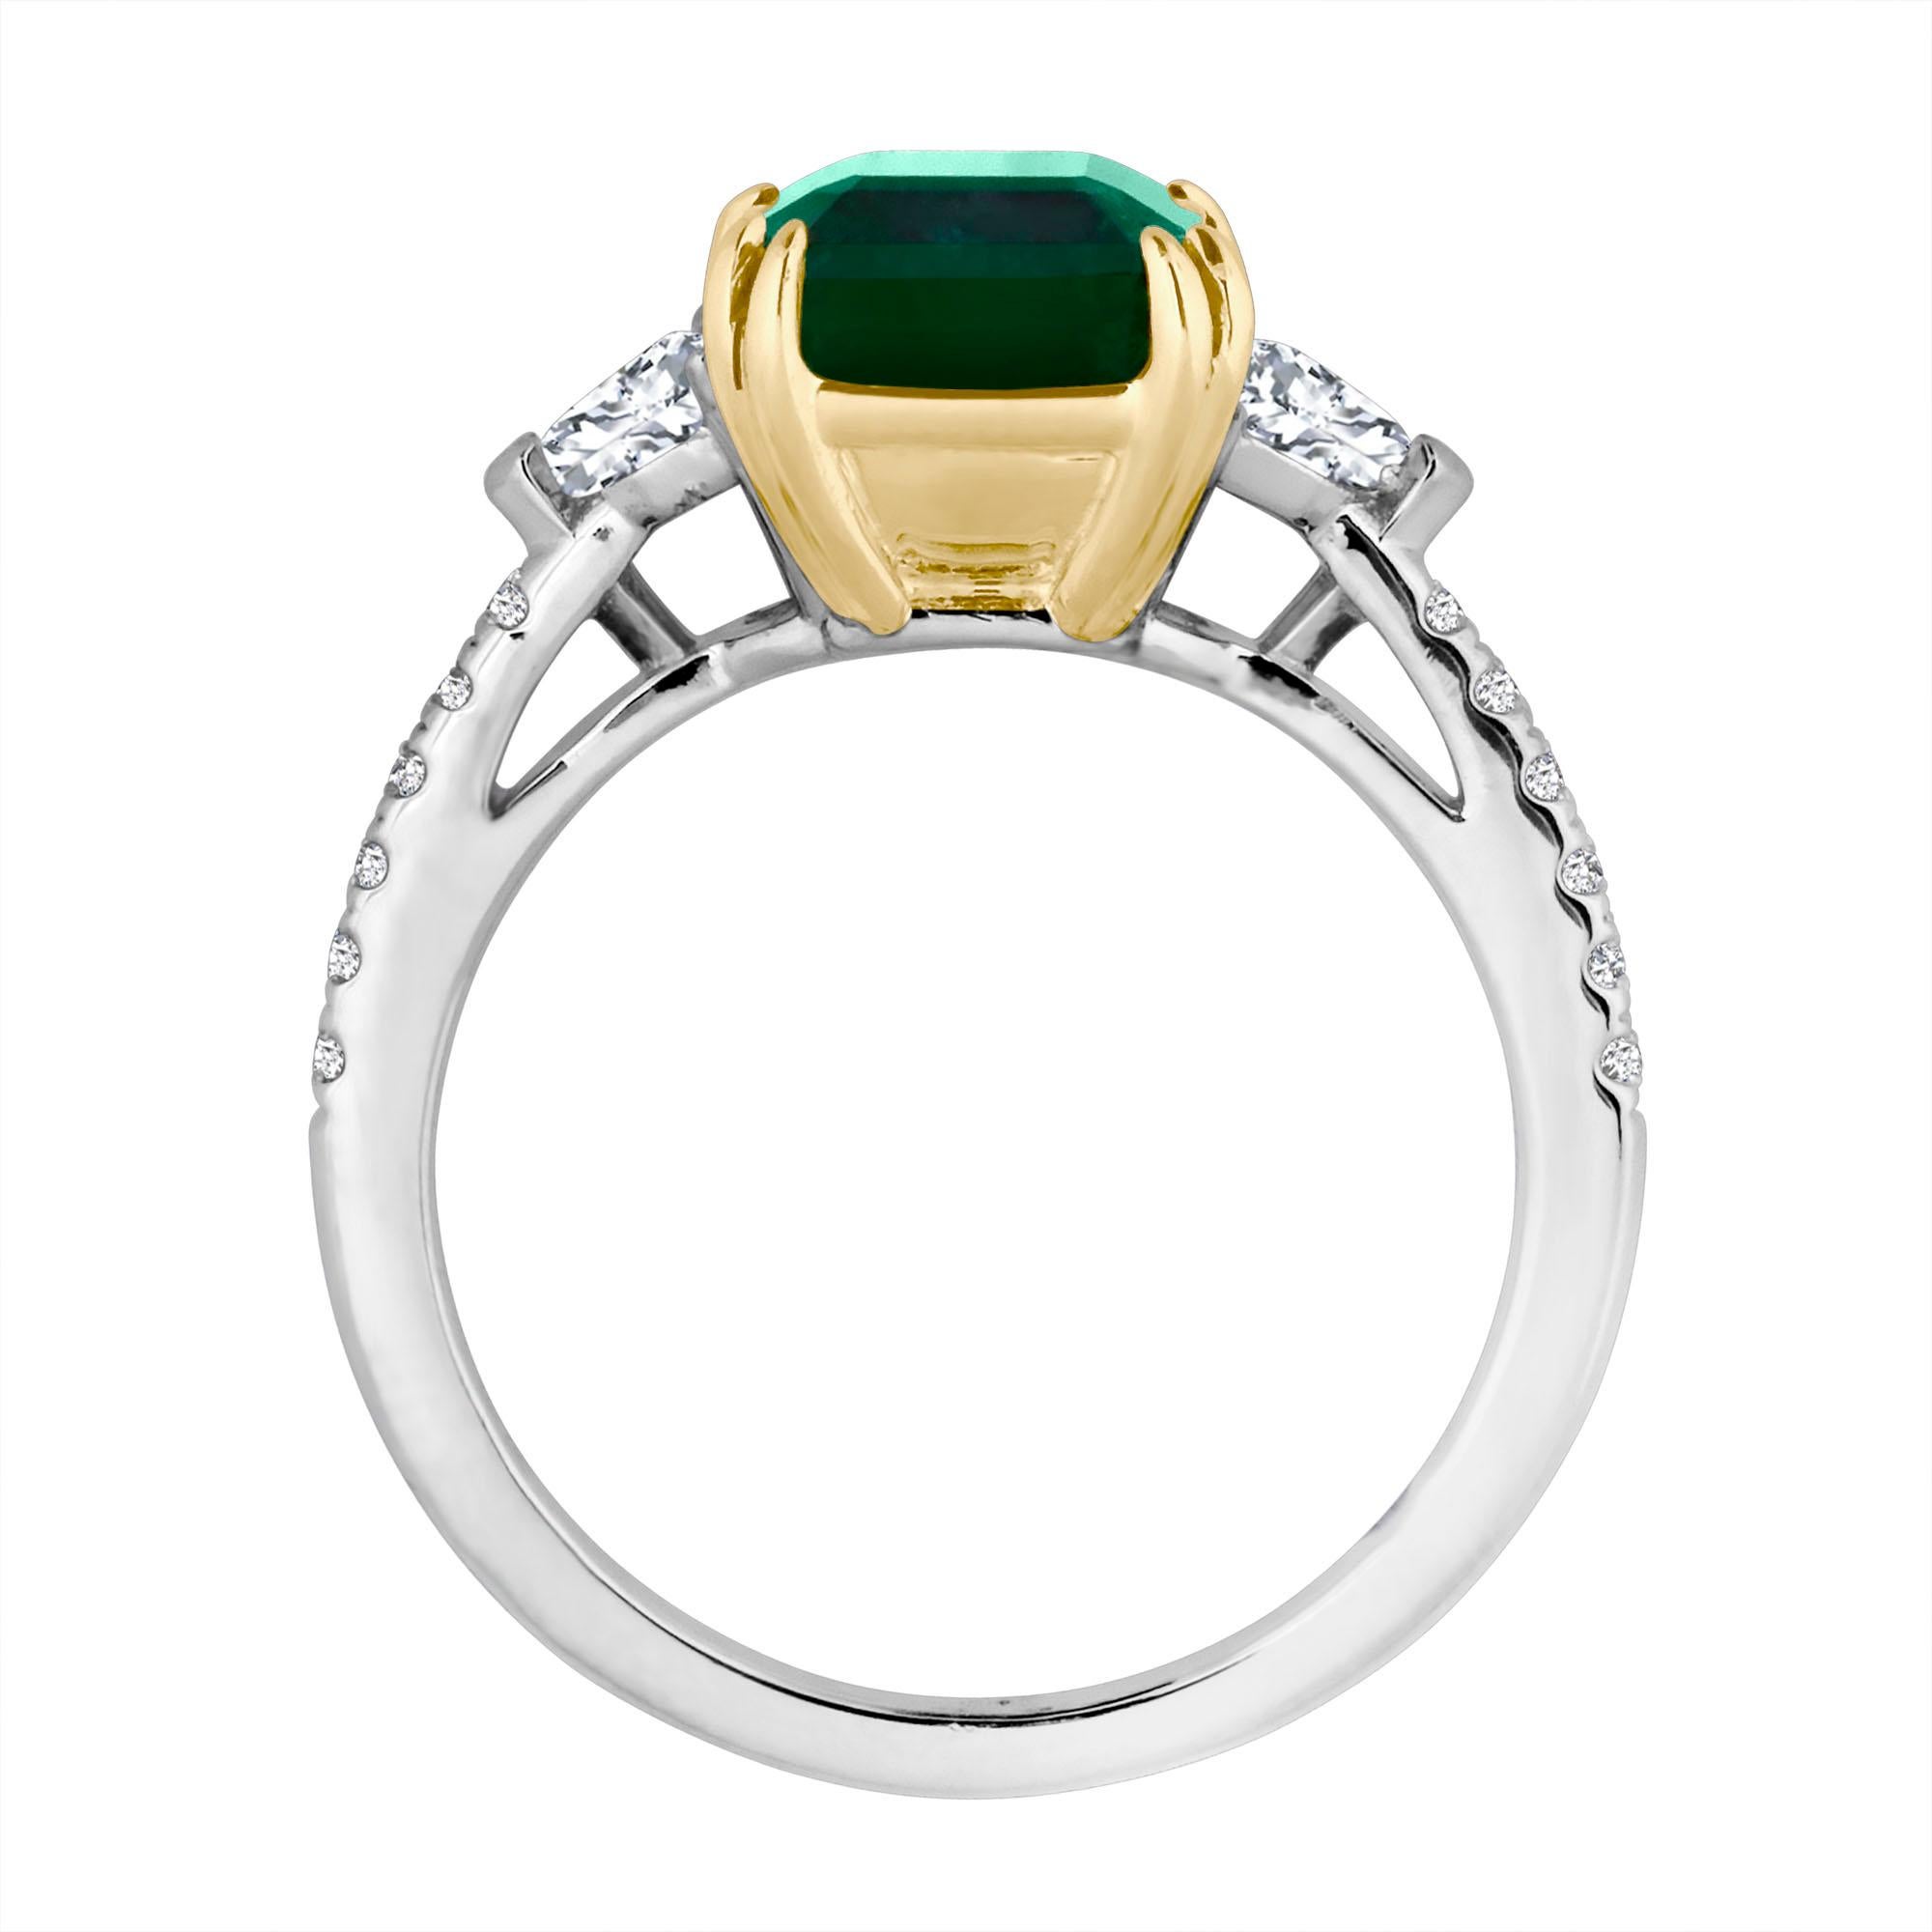 Hand made in the Emilio Jewelry Factory, A gorgeous deep green Emerald Cut Zambian Emerald 3.90ct set in the center. The emerald is fairly clean and completely eye clean. What makes this ring extremely unique are the Epaulette Cut Side Diamonds